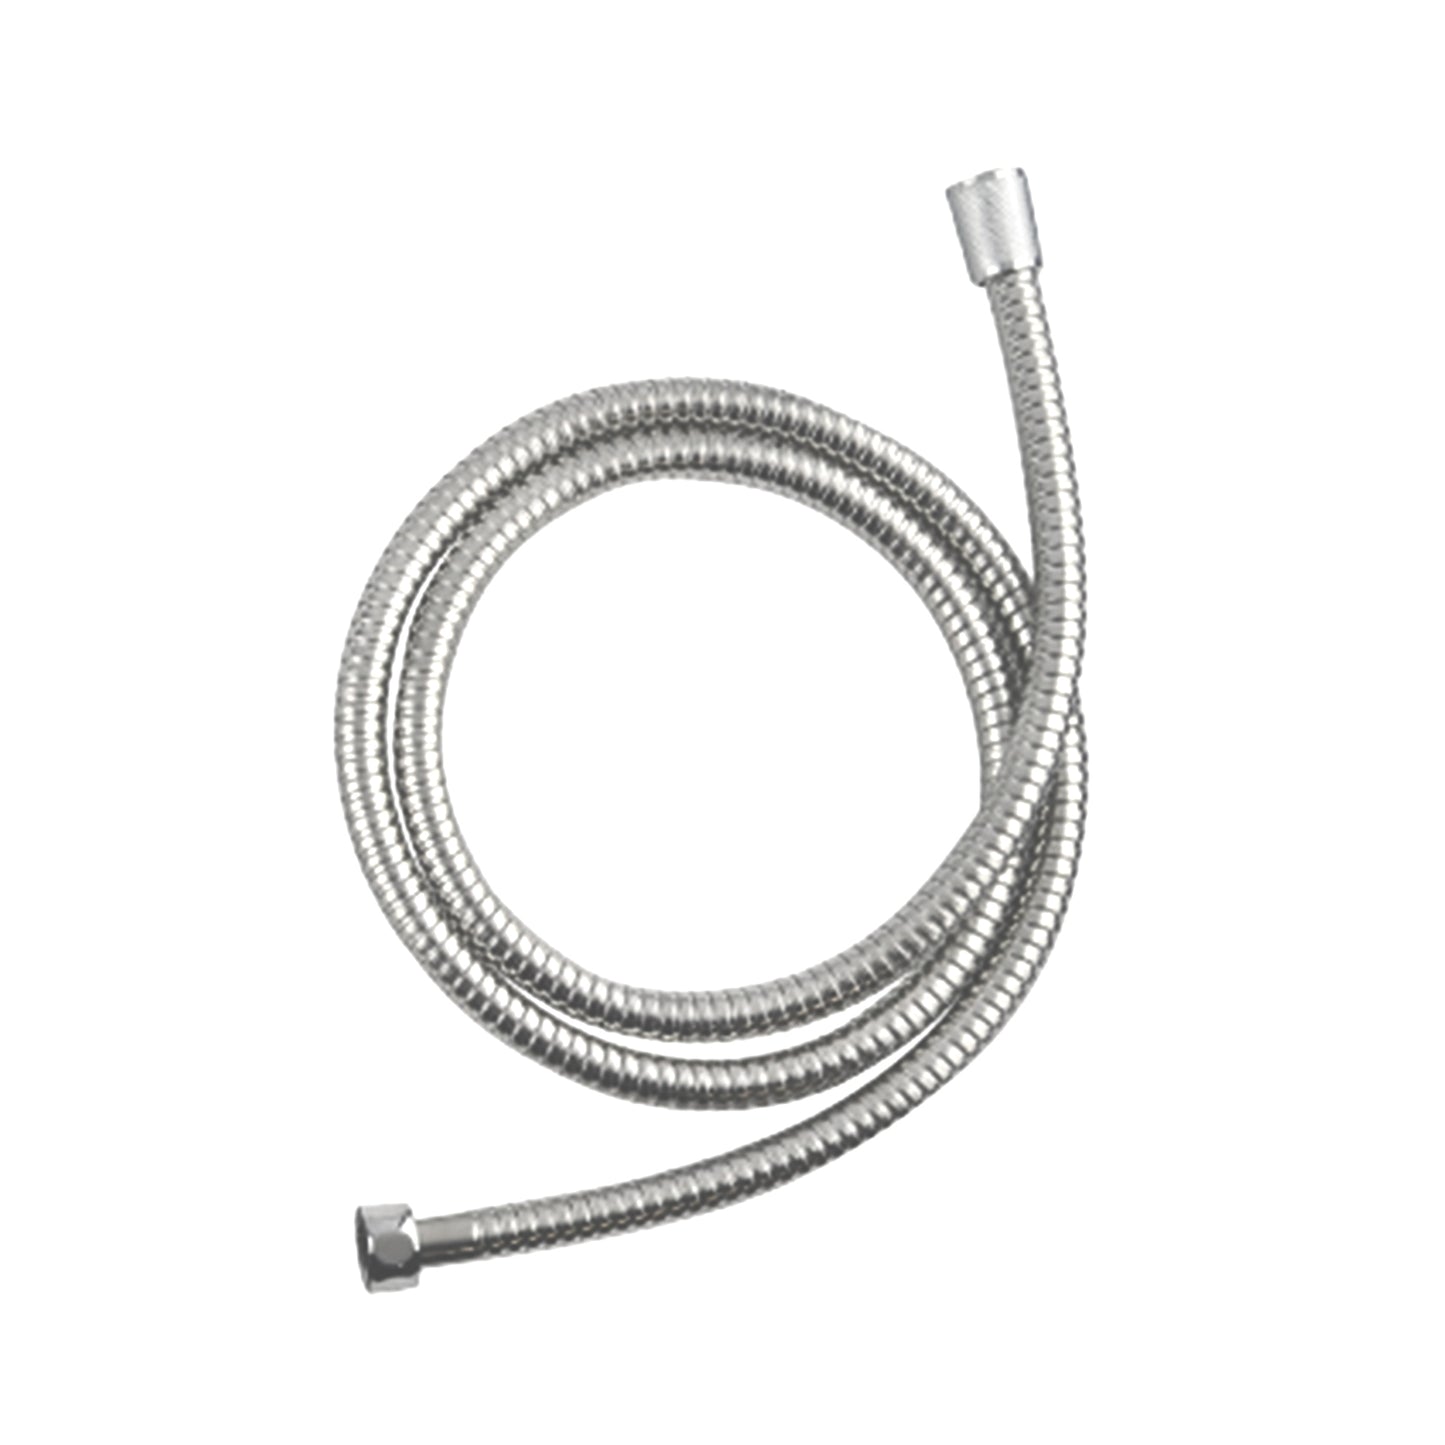 1.5m-Stainless-Steel-Non-Kink-Shower-Hose